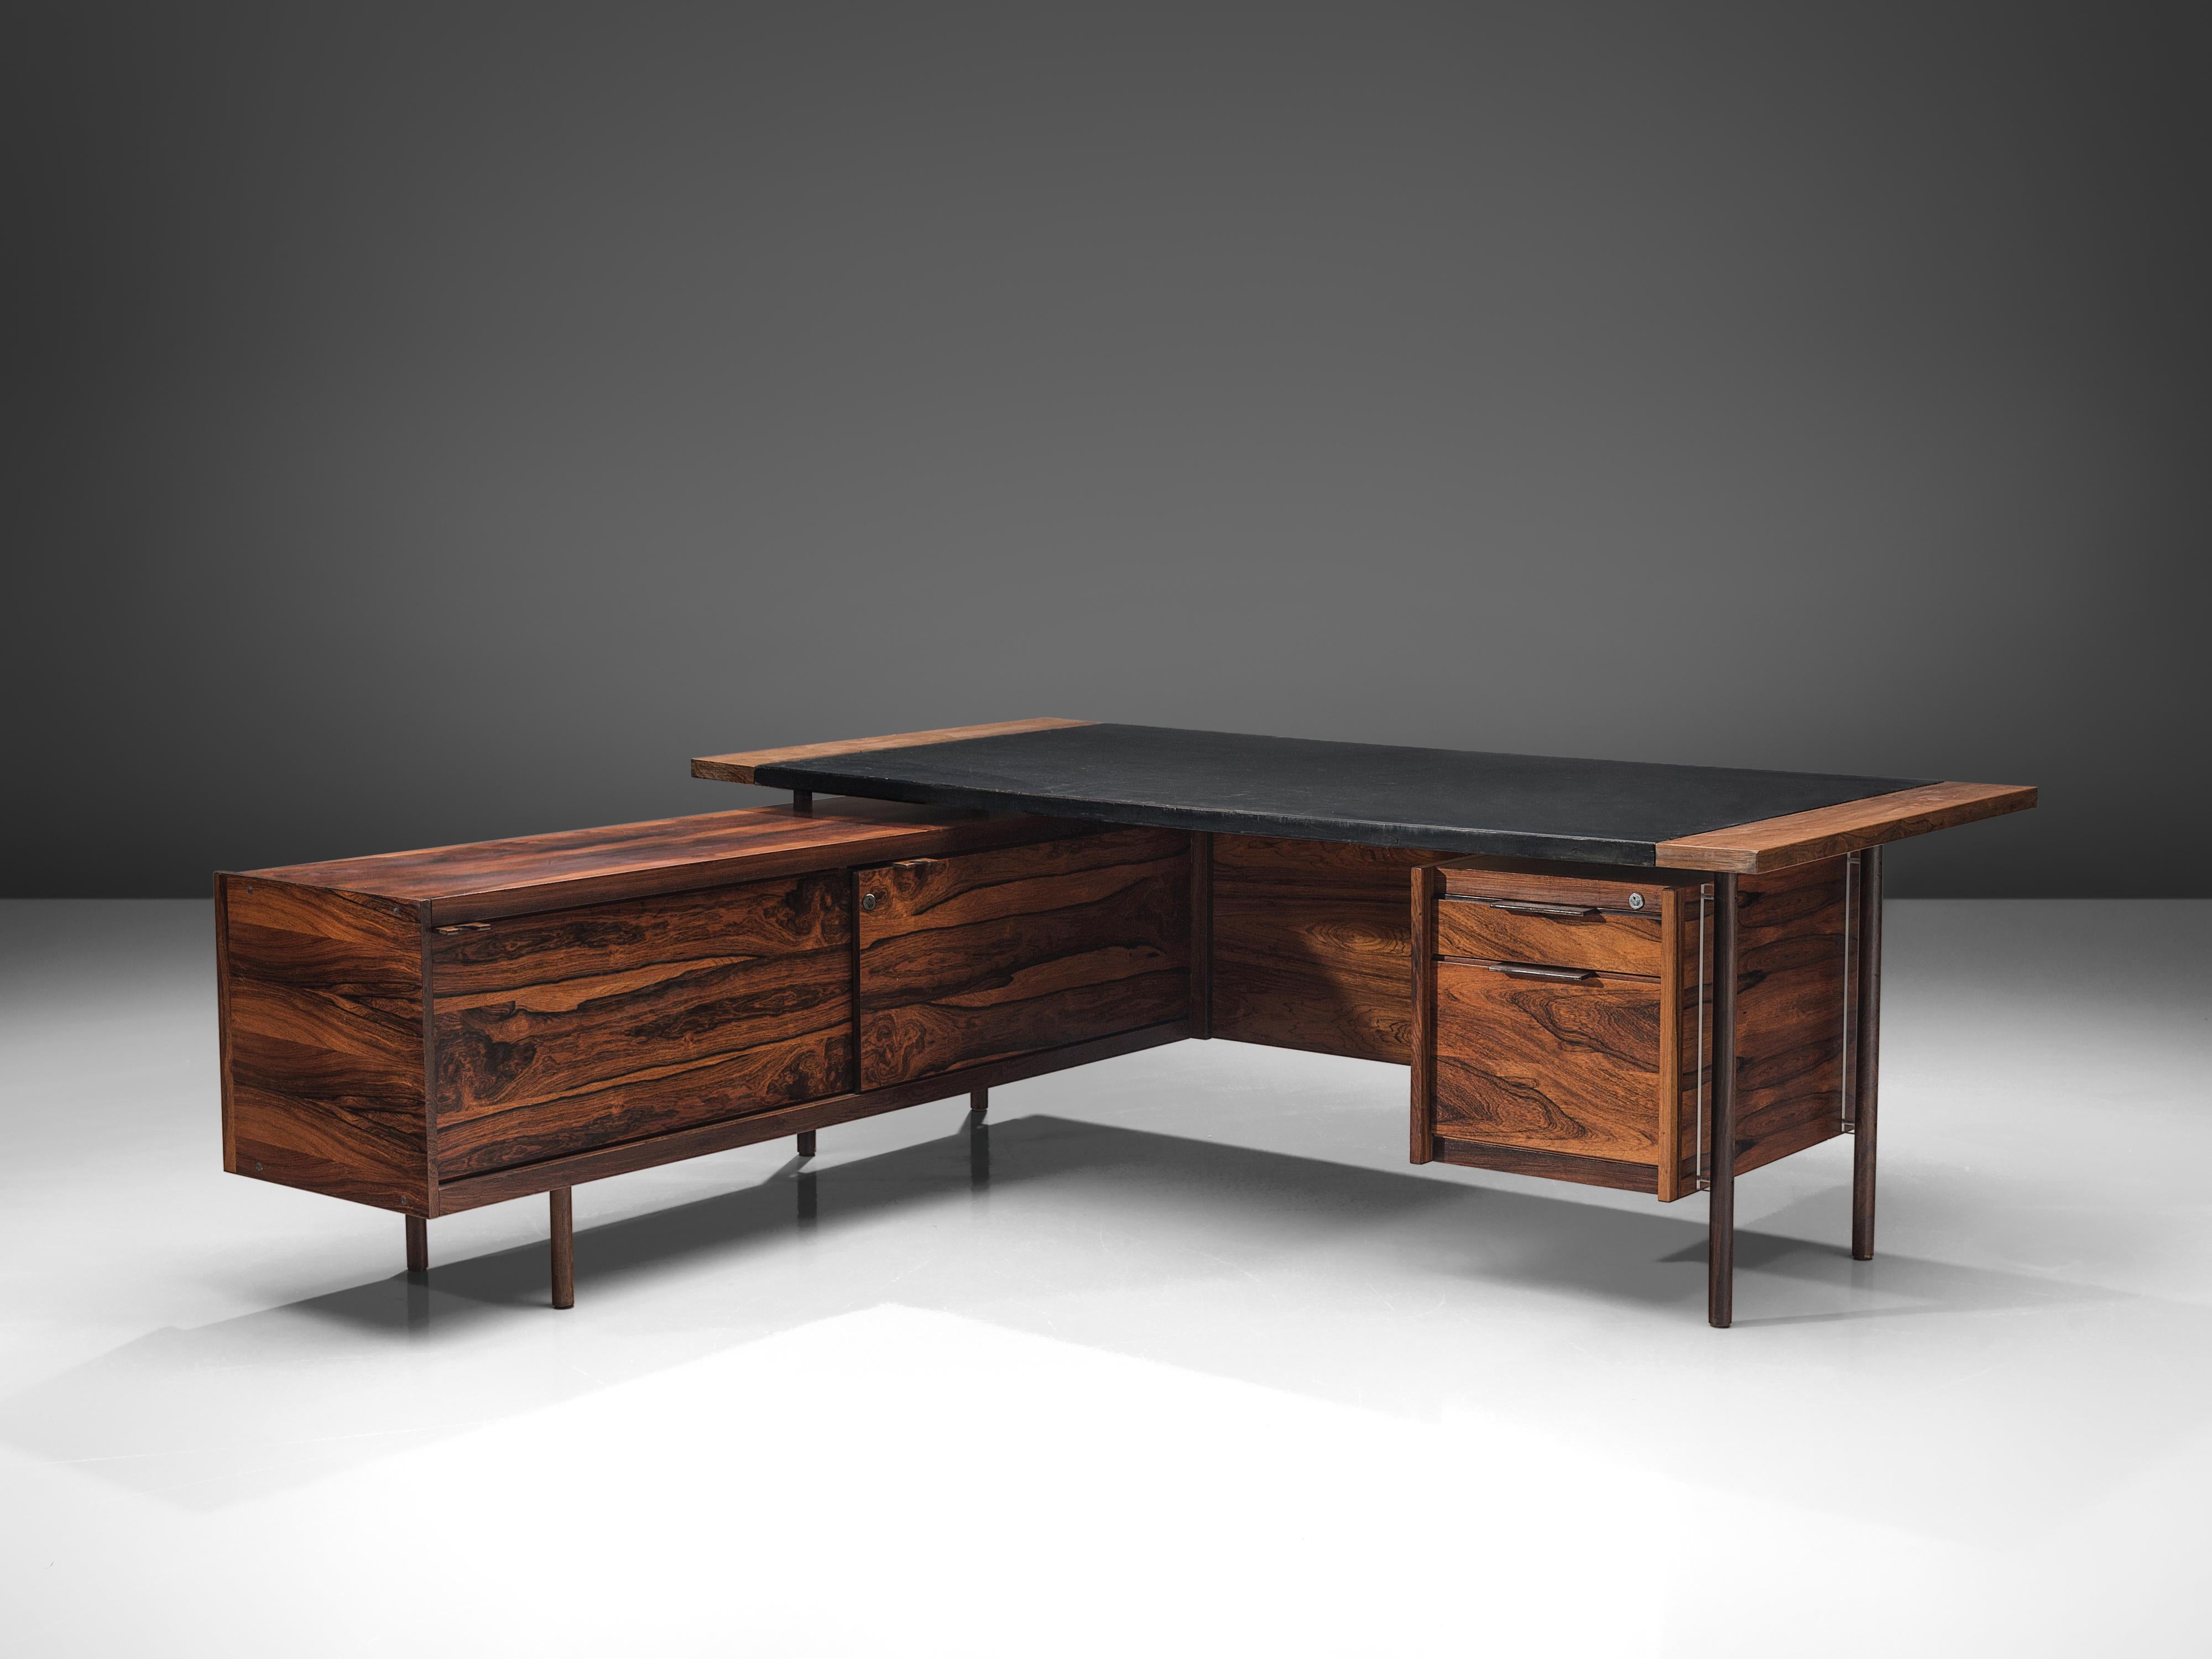 Sven Ivar Dysthe for Dokka Mobler, desk in rosewood, leather and Lucite, Norway, 1960s. 

This well-crafted executive desk in rosewood is designed by Sven Ivar Dysthe. The clear, modest design of this well-proportioned desk with left positioned